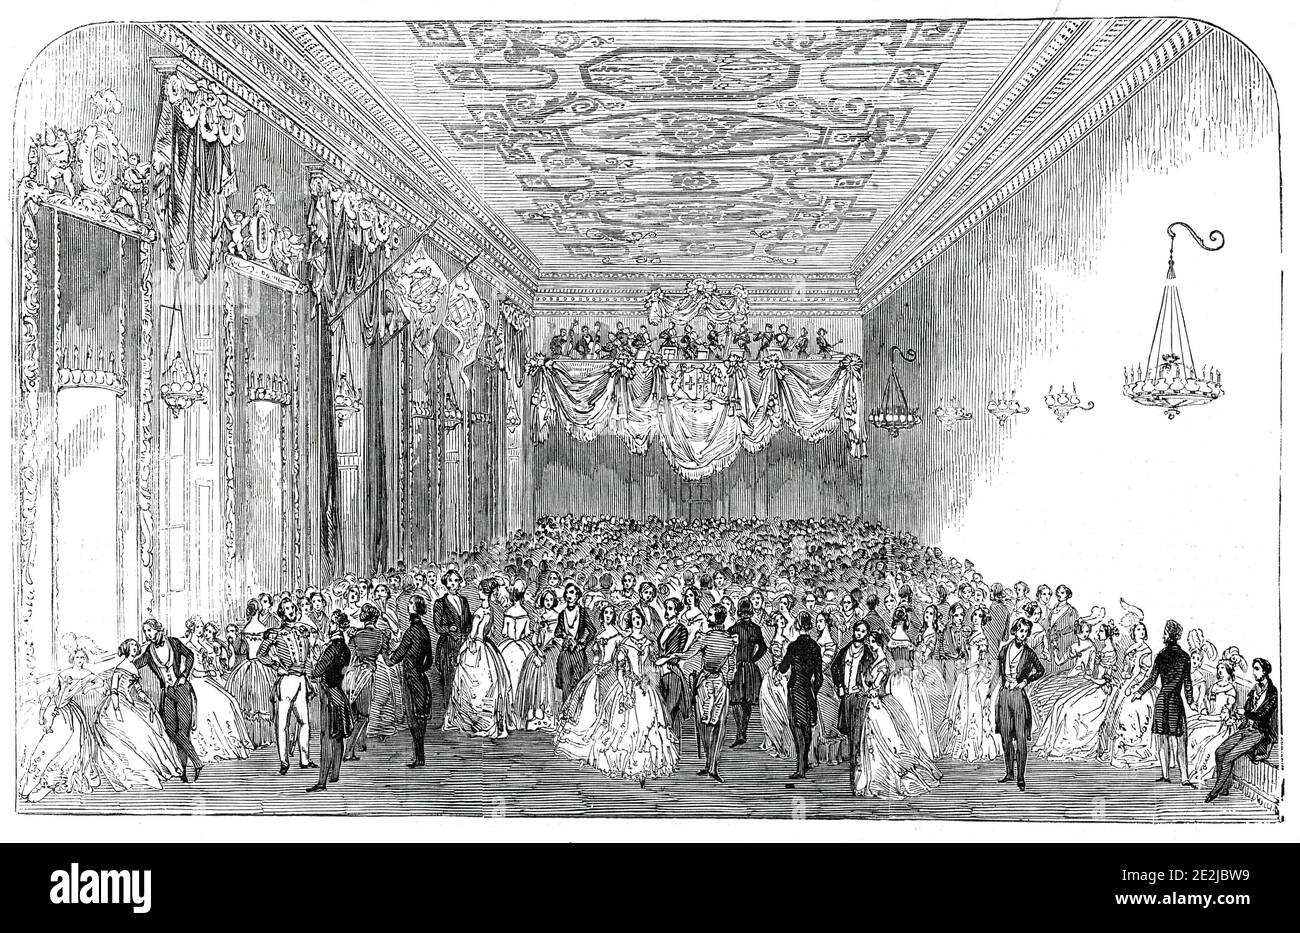 The Nobility's Ball, in the Banqueting-Room of Harewood House, 1845. Celebrations at Harewood House near Leeds in Yorkshire. 'The events which gave rise to the Festival were the Coming of Age, and Marriage, of Lord Viscount Lascelles, the eldest son of the present Earl of Harewood...a magnificent Ball was given to upwards of 700 of the nobility and gentry, which was kept up with great spirit until five o'clock. The Banqueting Room was most superbly refitted for the occasion...'. From &quot;Illustrated London News&quot;, 1845, Vol VII. Stock Photo